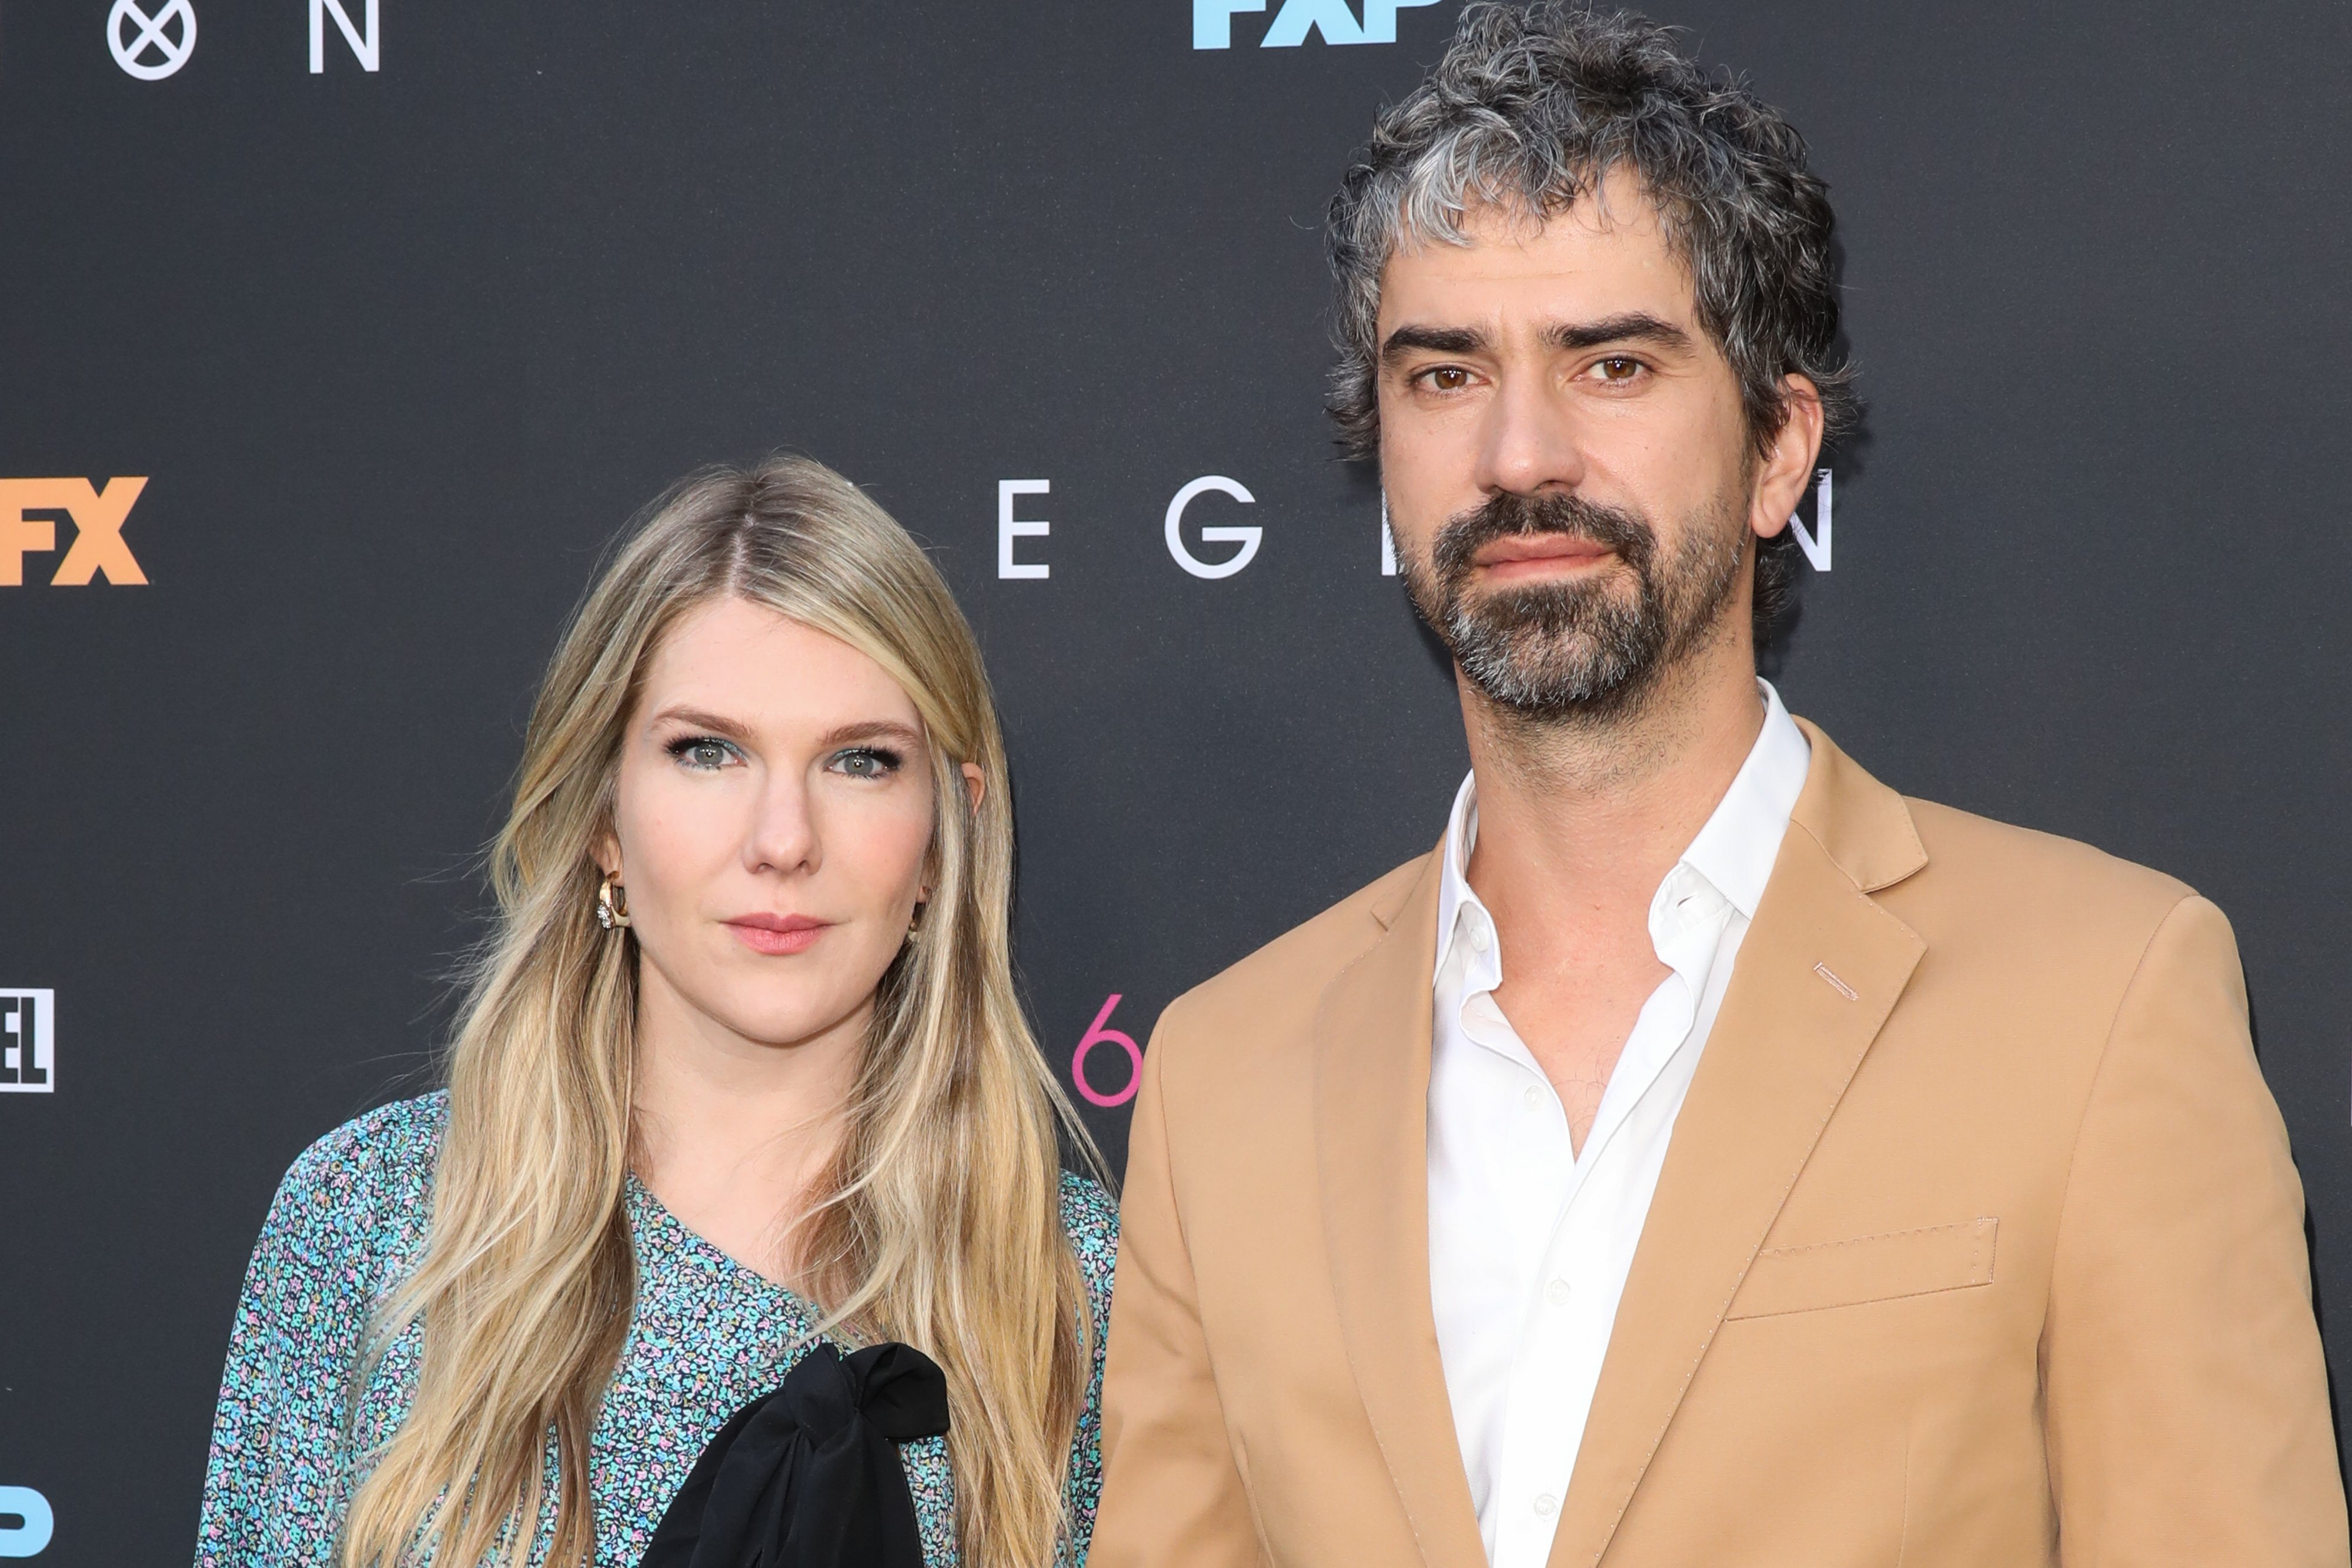 Lily Rabe and Hamish Linklater attend the LA premiere of FX's "Legion" season 3 at ArcLight Hollywood on June 13, 2019 | Photo: GettyImages